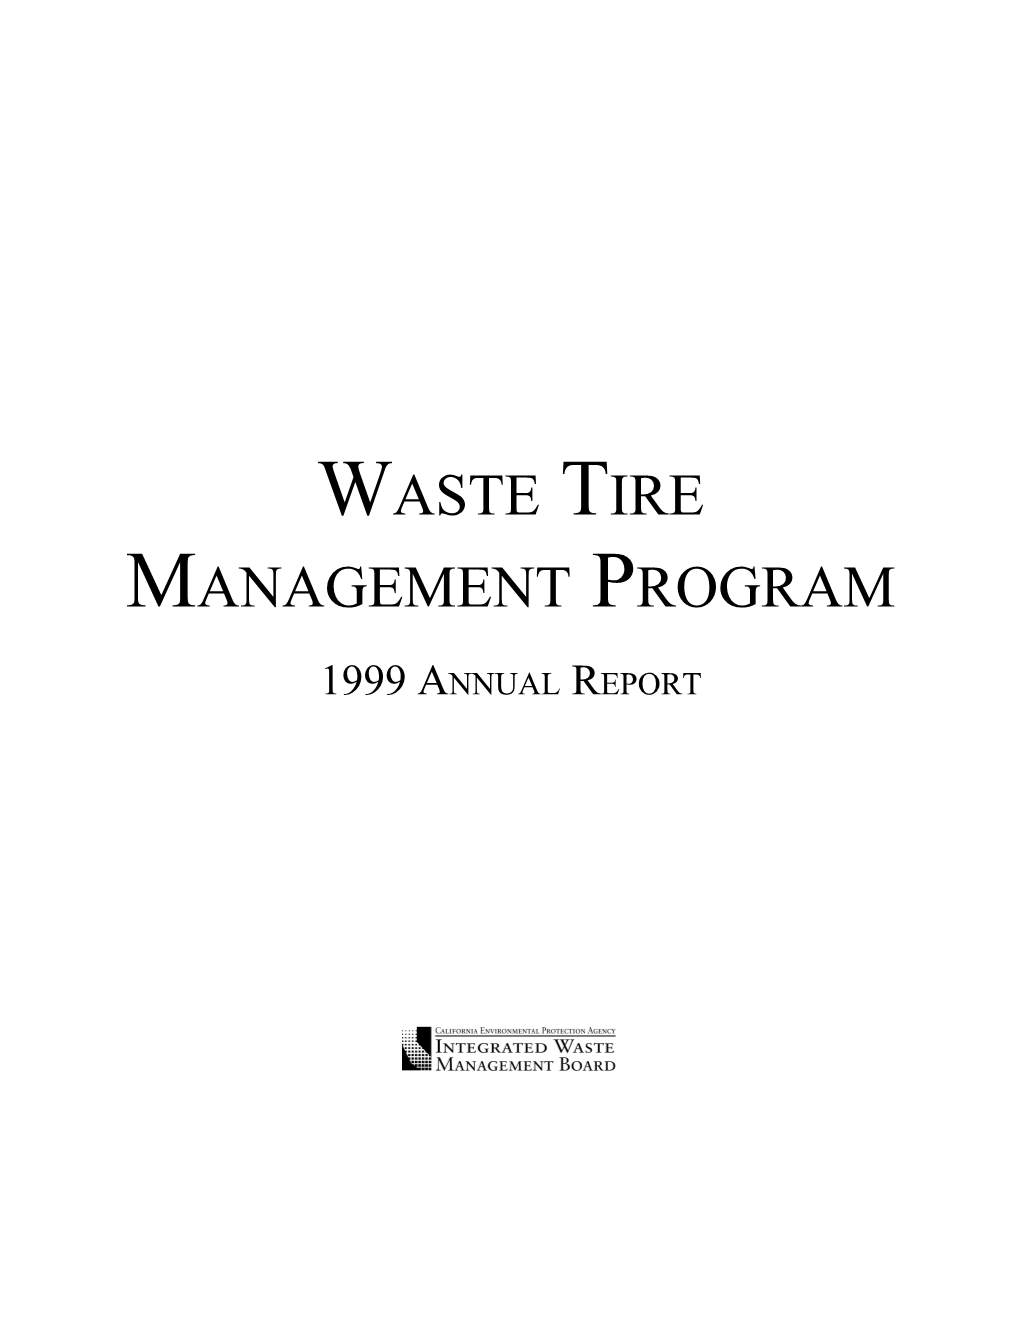 Waste Tire Management Program: 1999 Annual Report